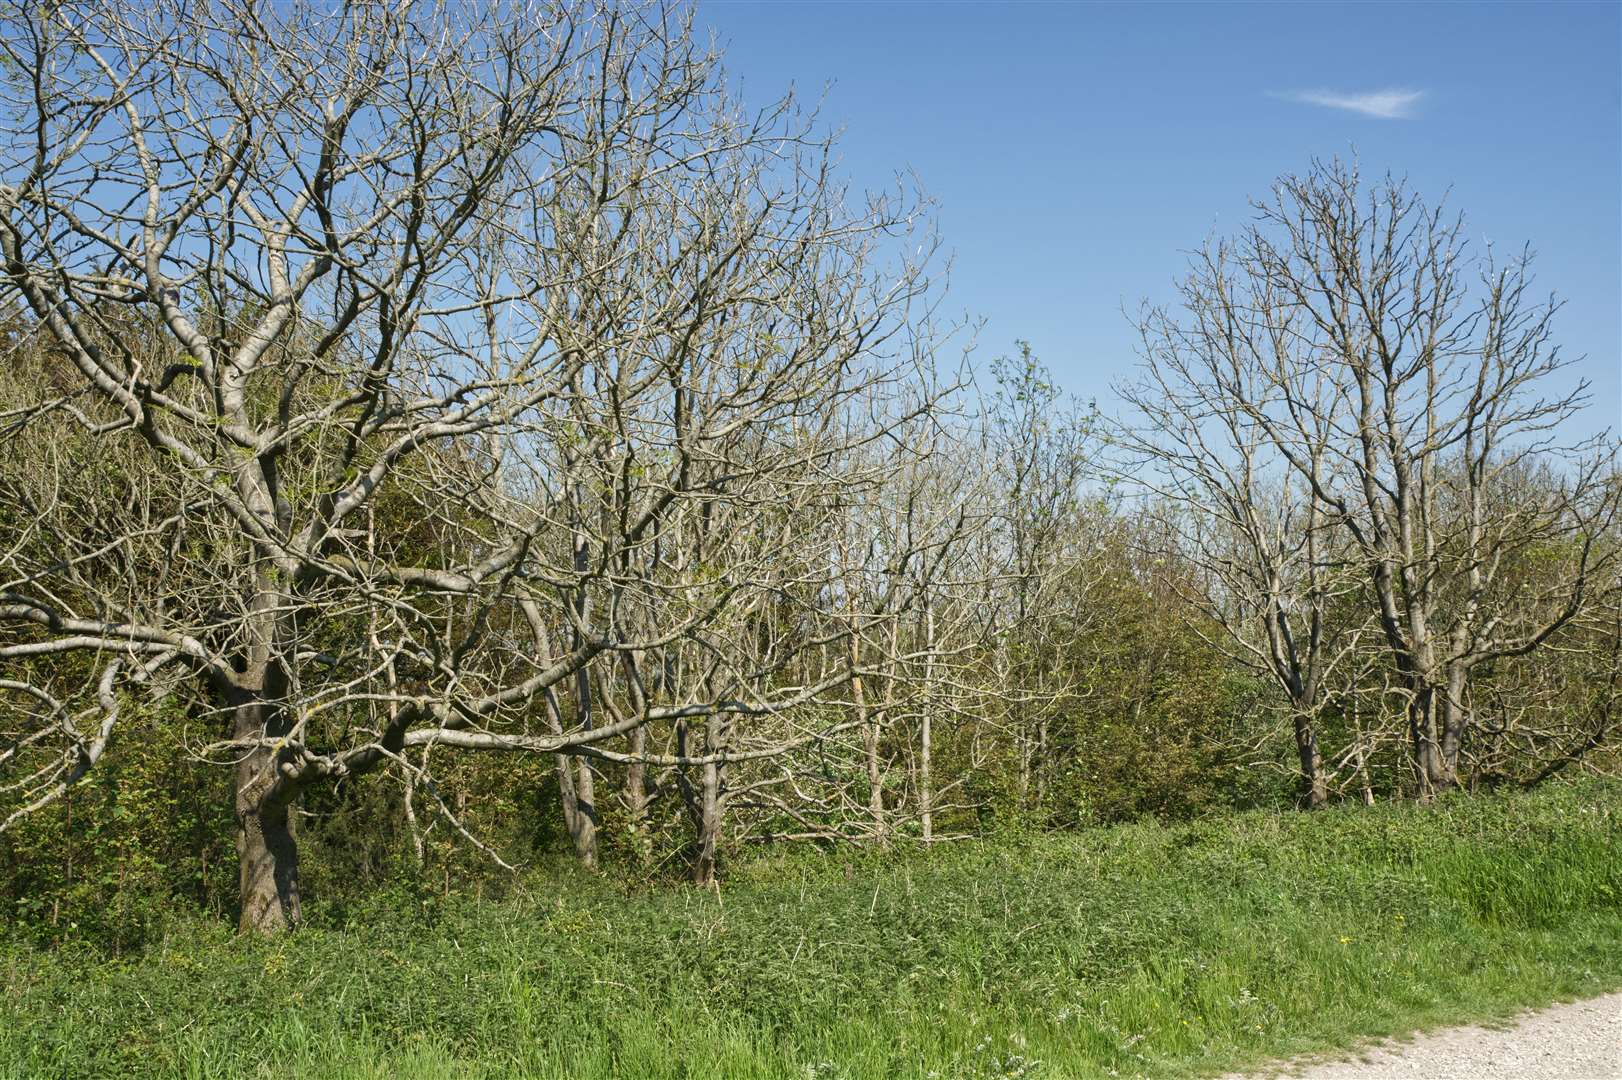 Ash trees with dieback first lose their foliage and then die